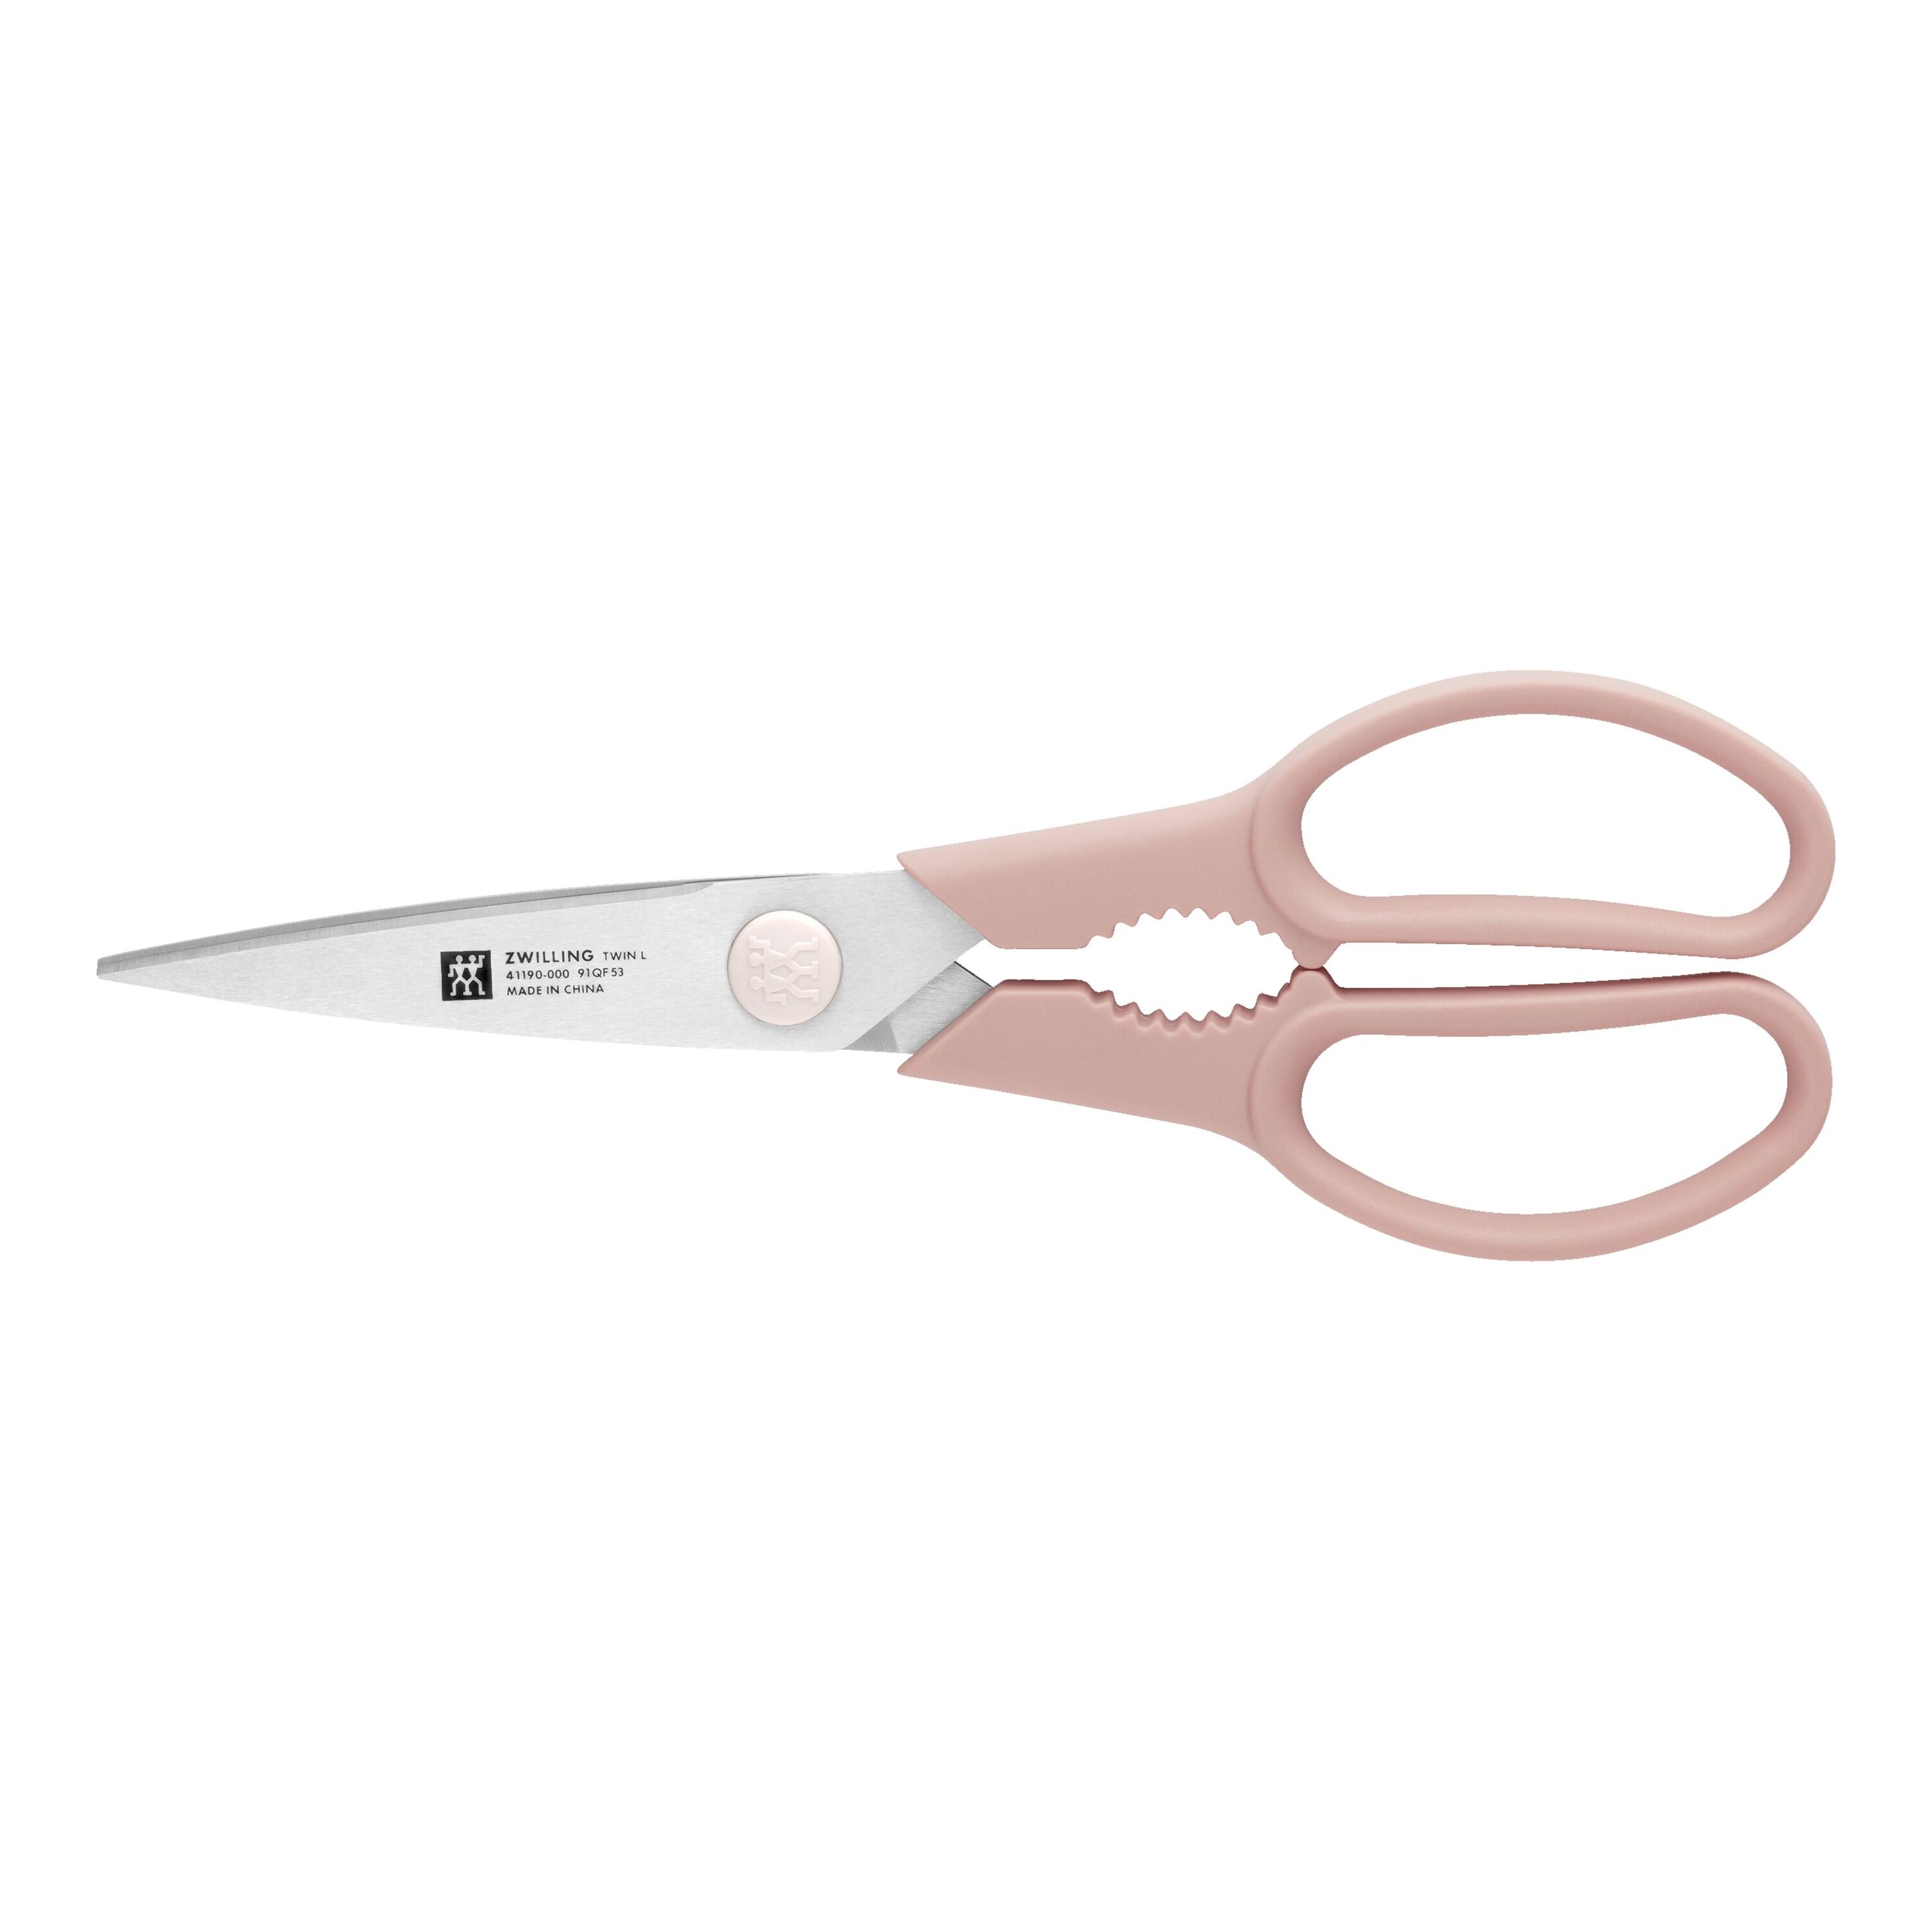 Buy ZWILLING Now S Multi-purpose shears